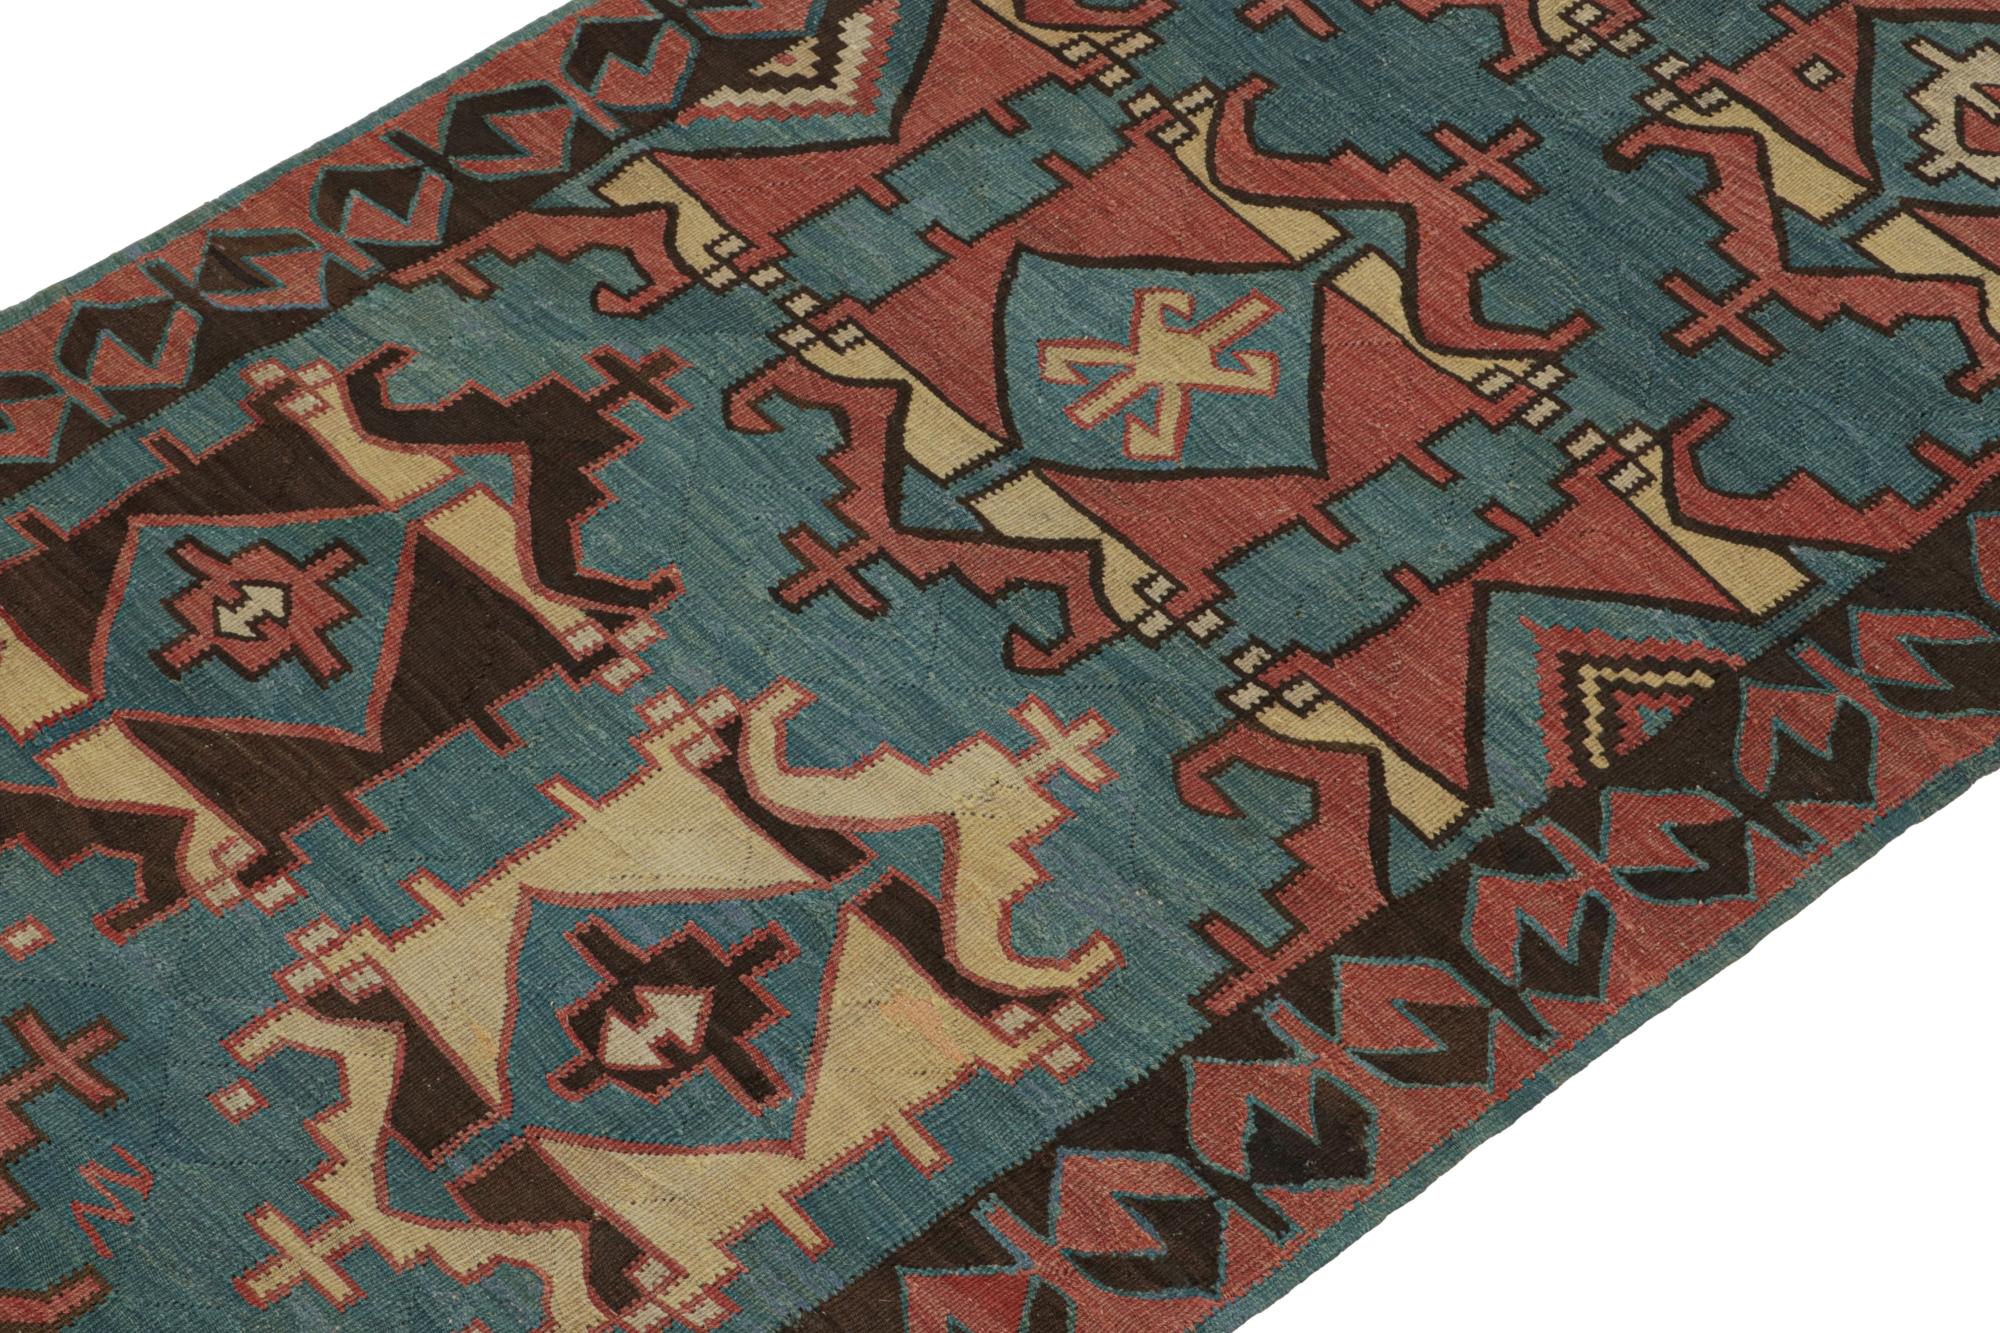 This vintage 4x9 Persian Kilim is handwoven in wool, and originates circa 1950-1960.

On the Design: 

This flat weave enjoys sharp medallions and geometric patterns in deep blue brick red with beige and chocolate notes. Connoisseurs will note